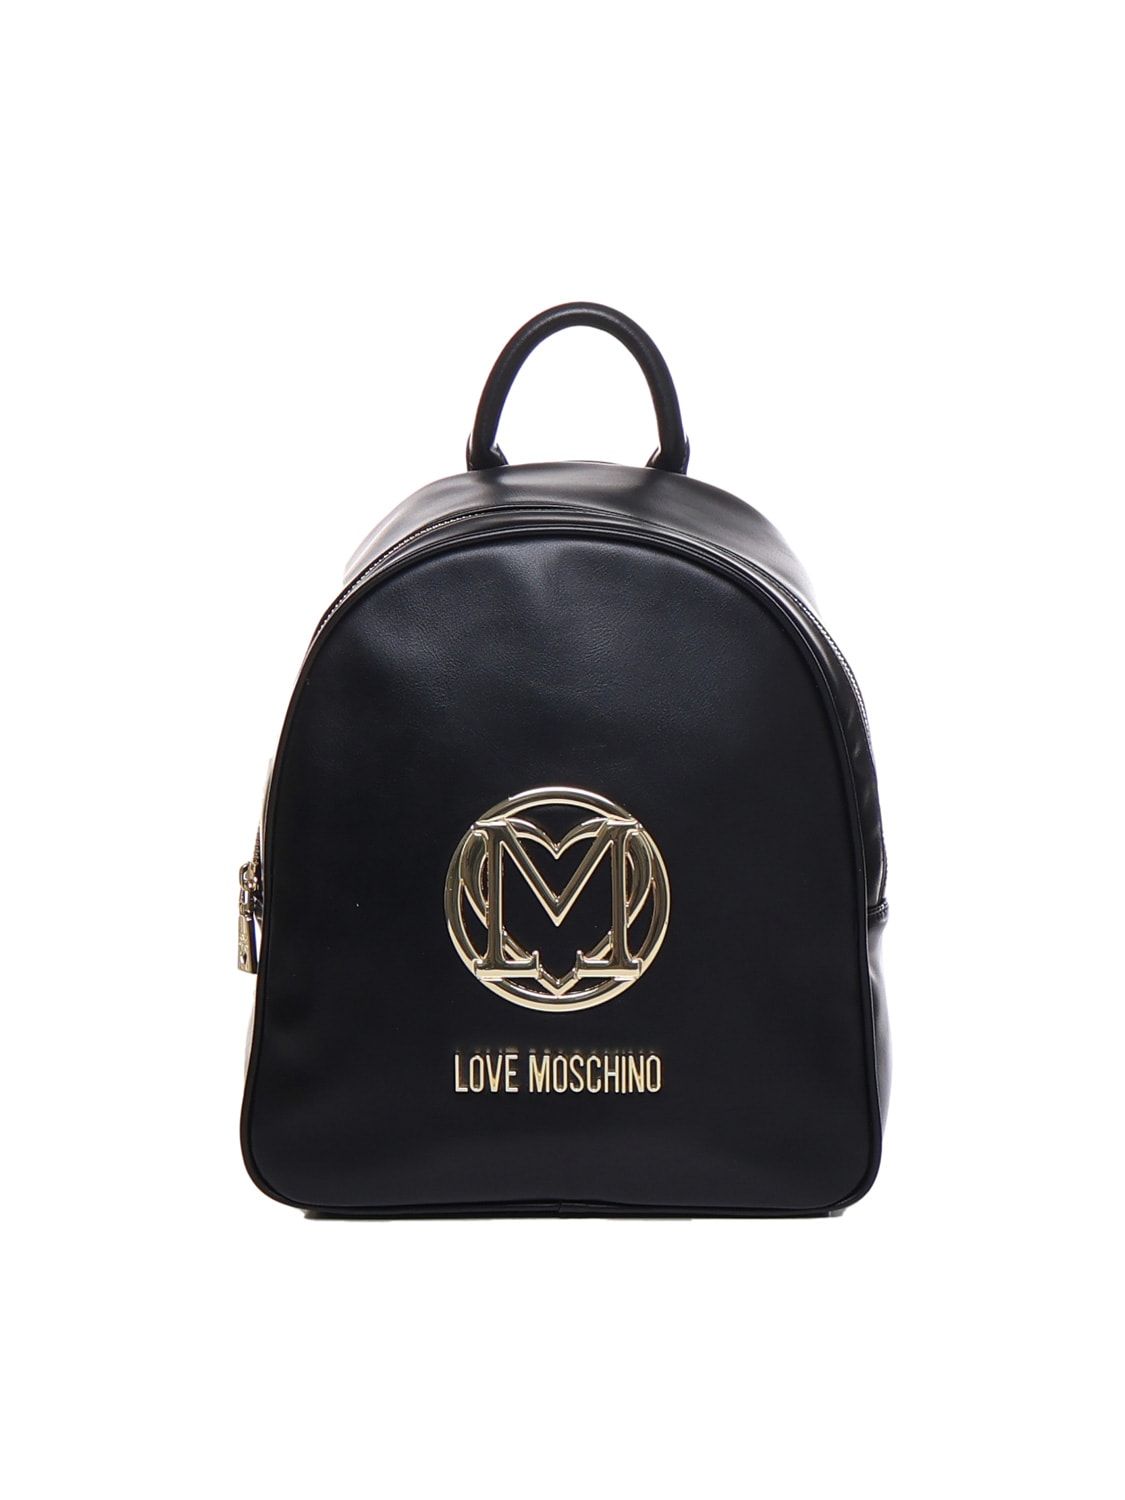 LOVE MOSCHINO LEATHER BACKPACK WITH LOGO